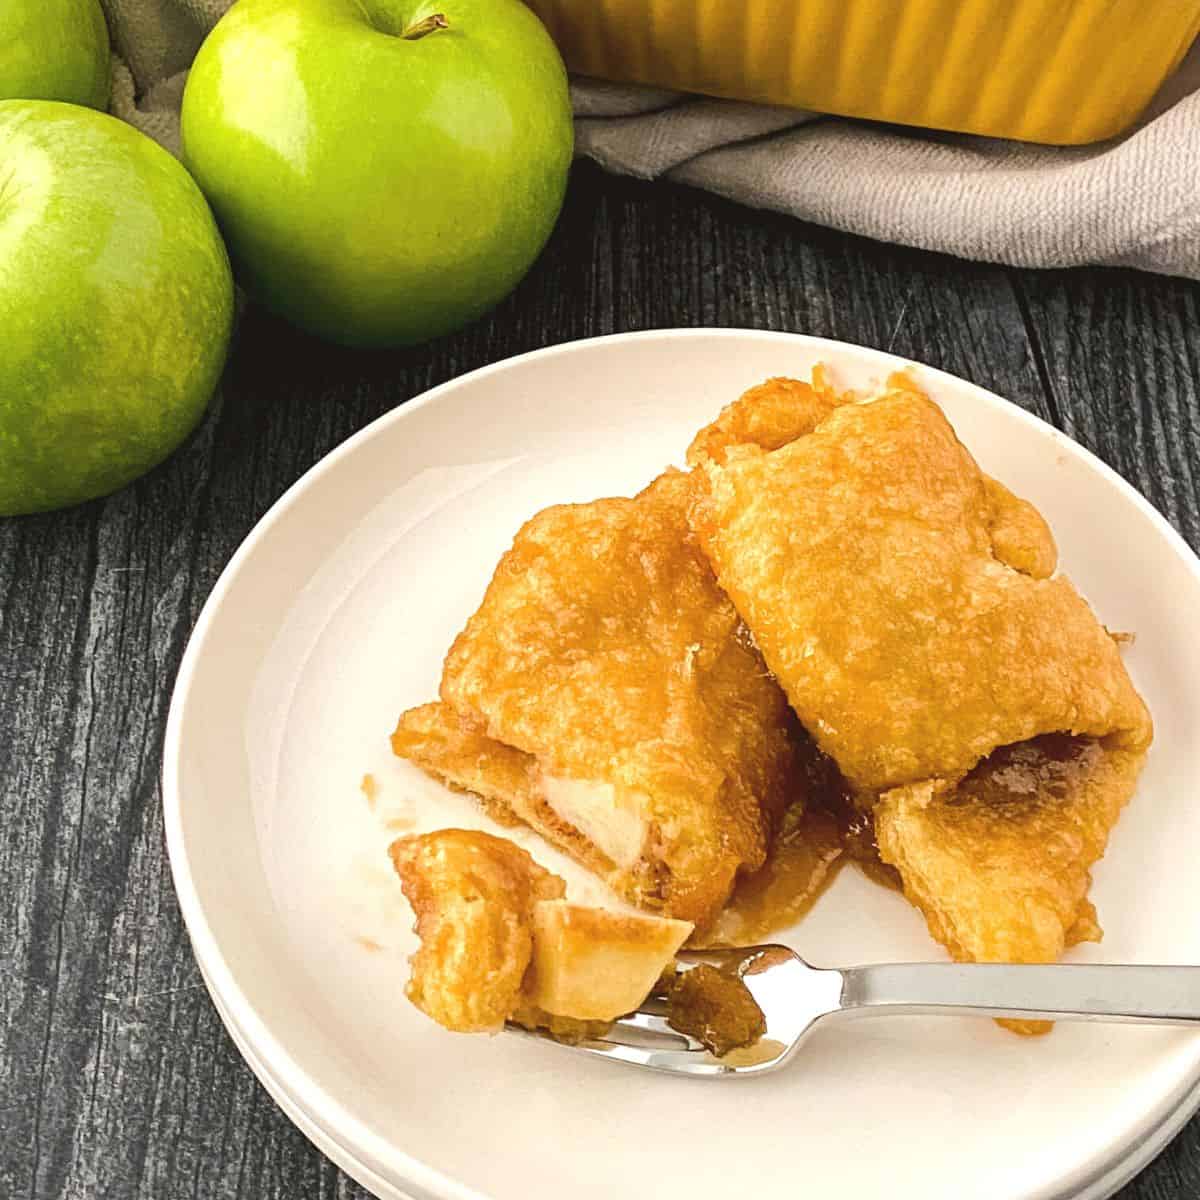 Apple Pie Crescent Roll Recipe, an easy breakfast or dessert idea combining the flavors of apple pie with the convenience of crescent dough.